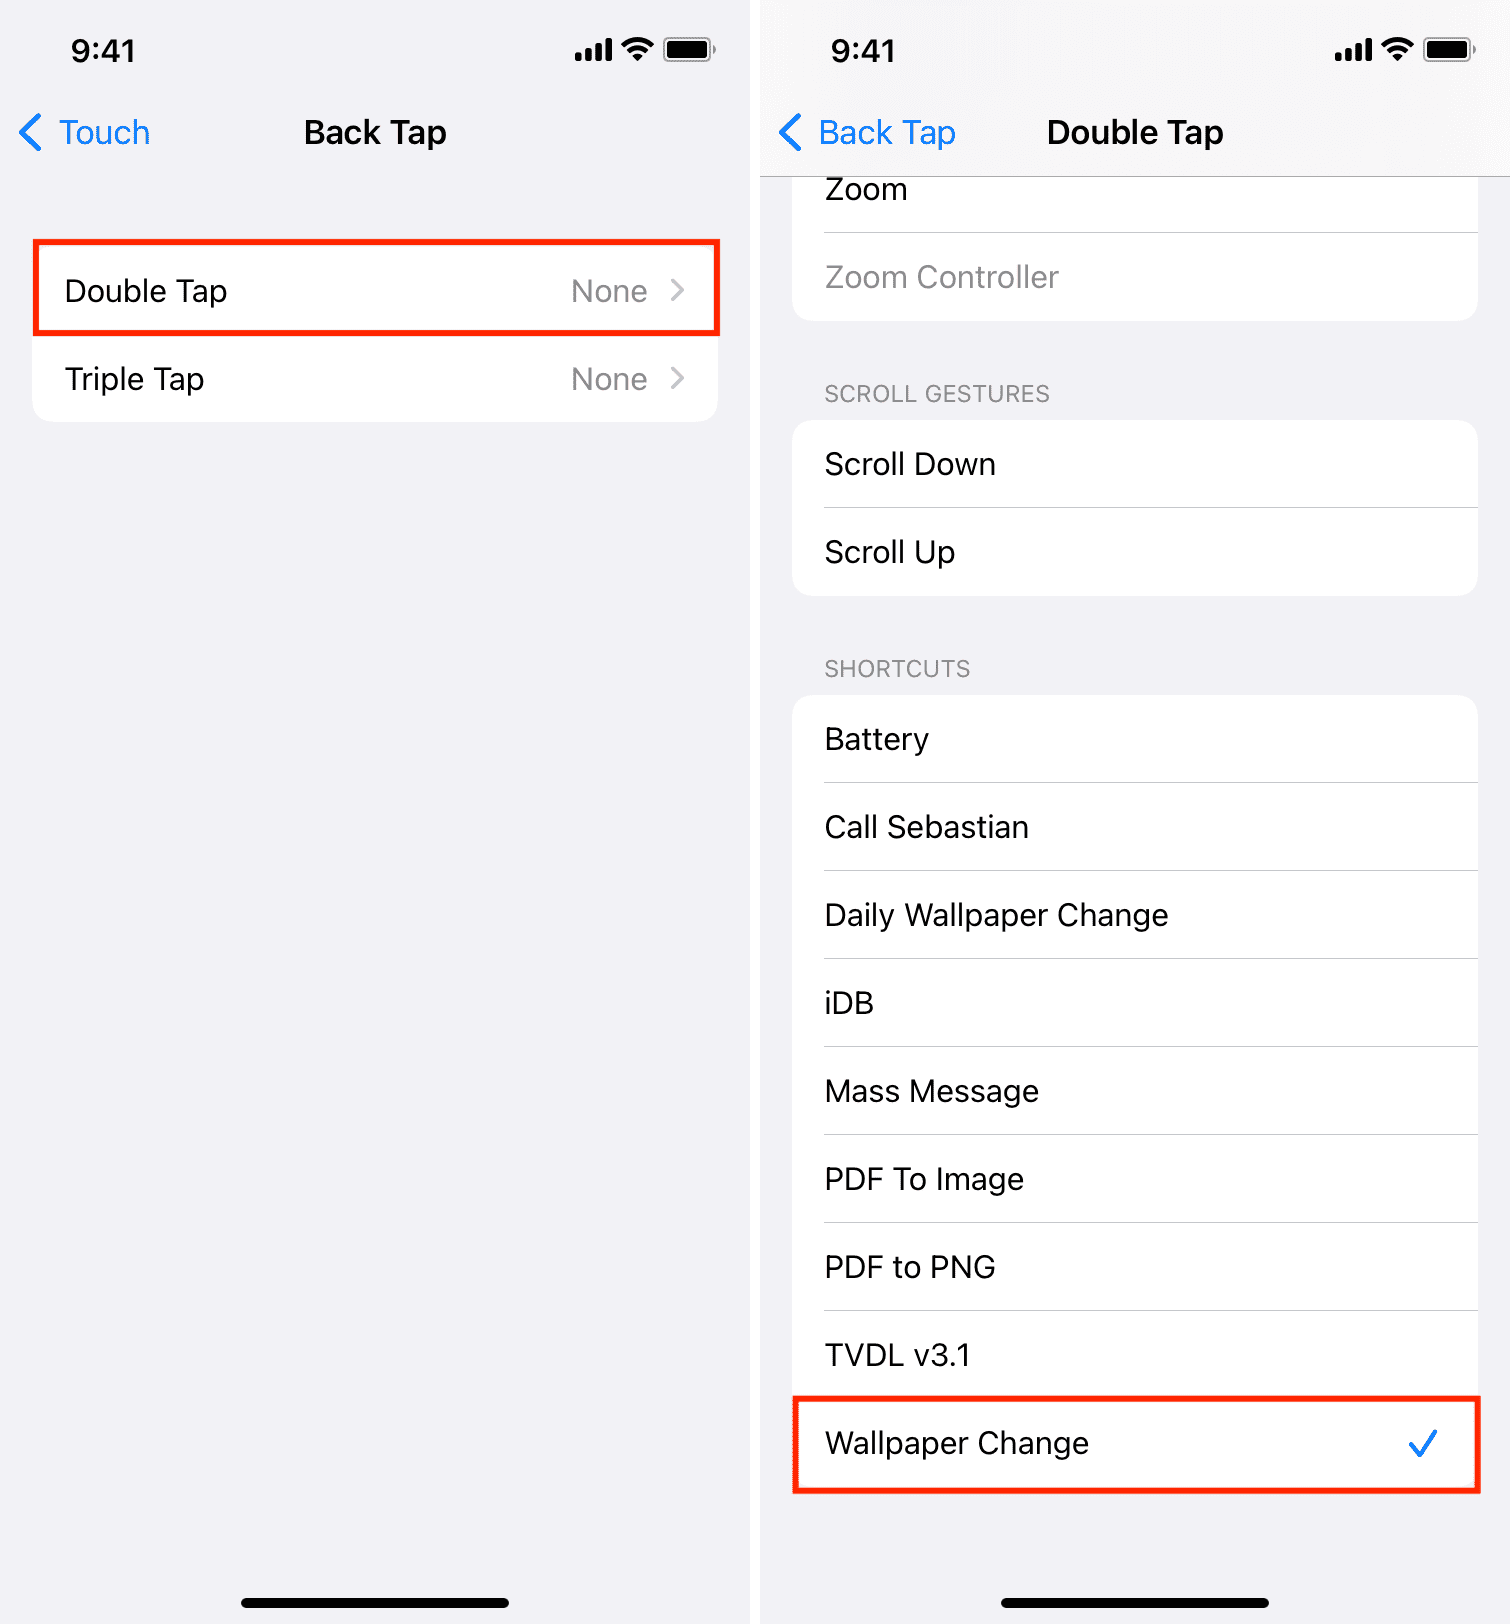 Wallpaper Change shortcut as double back tap on iPhone